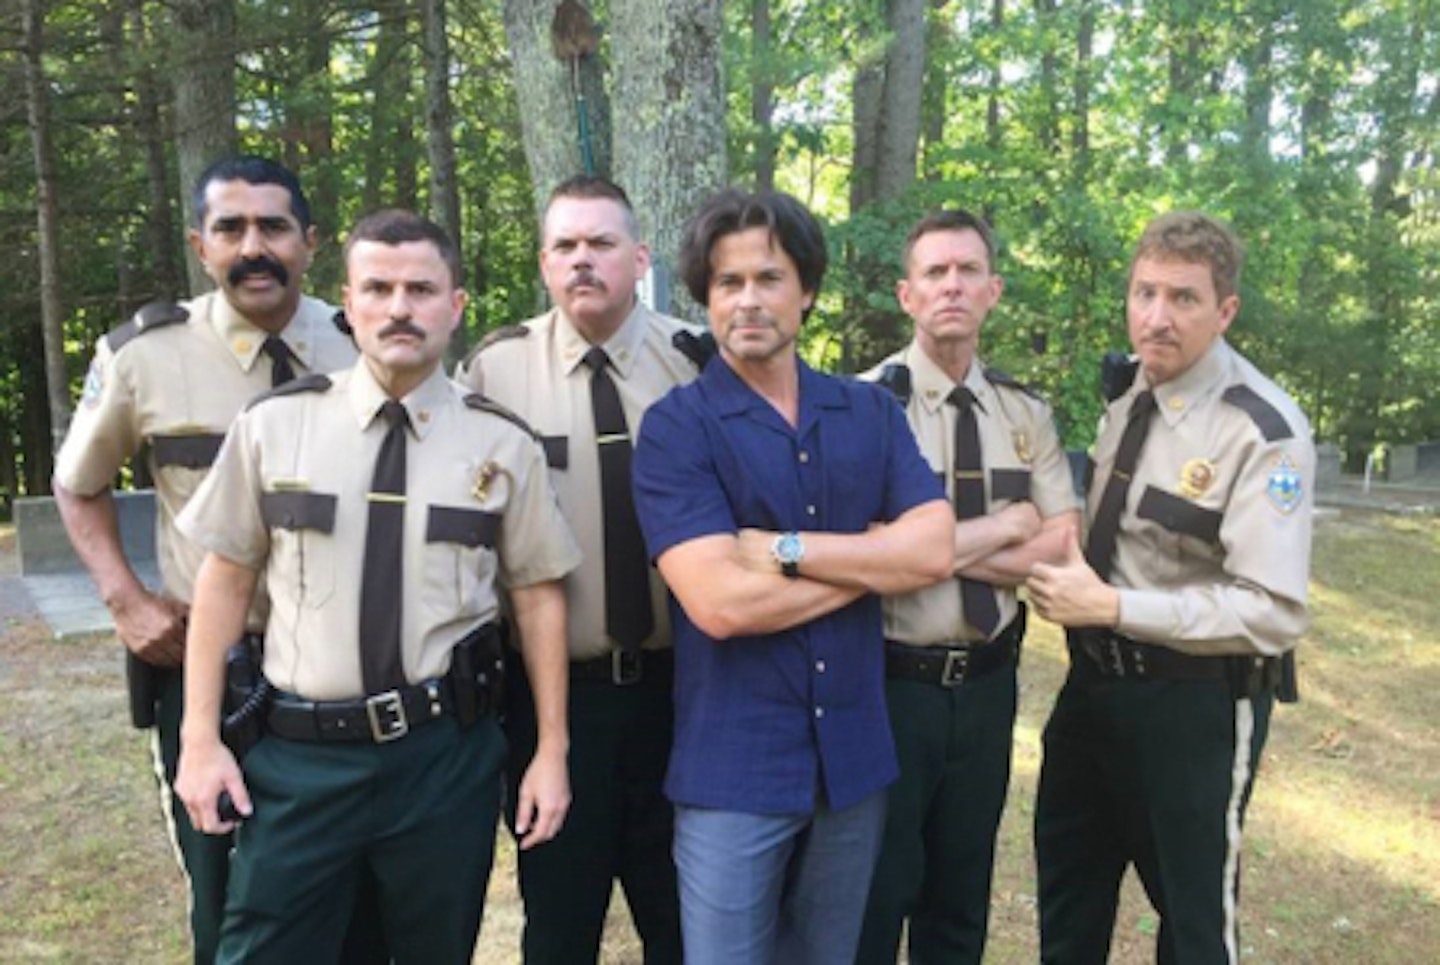 Rob Lowe and the Super Troopers 2 cast